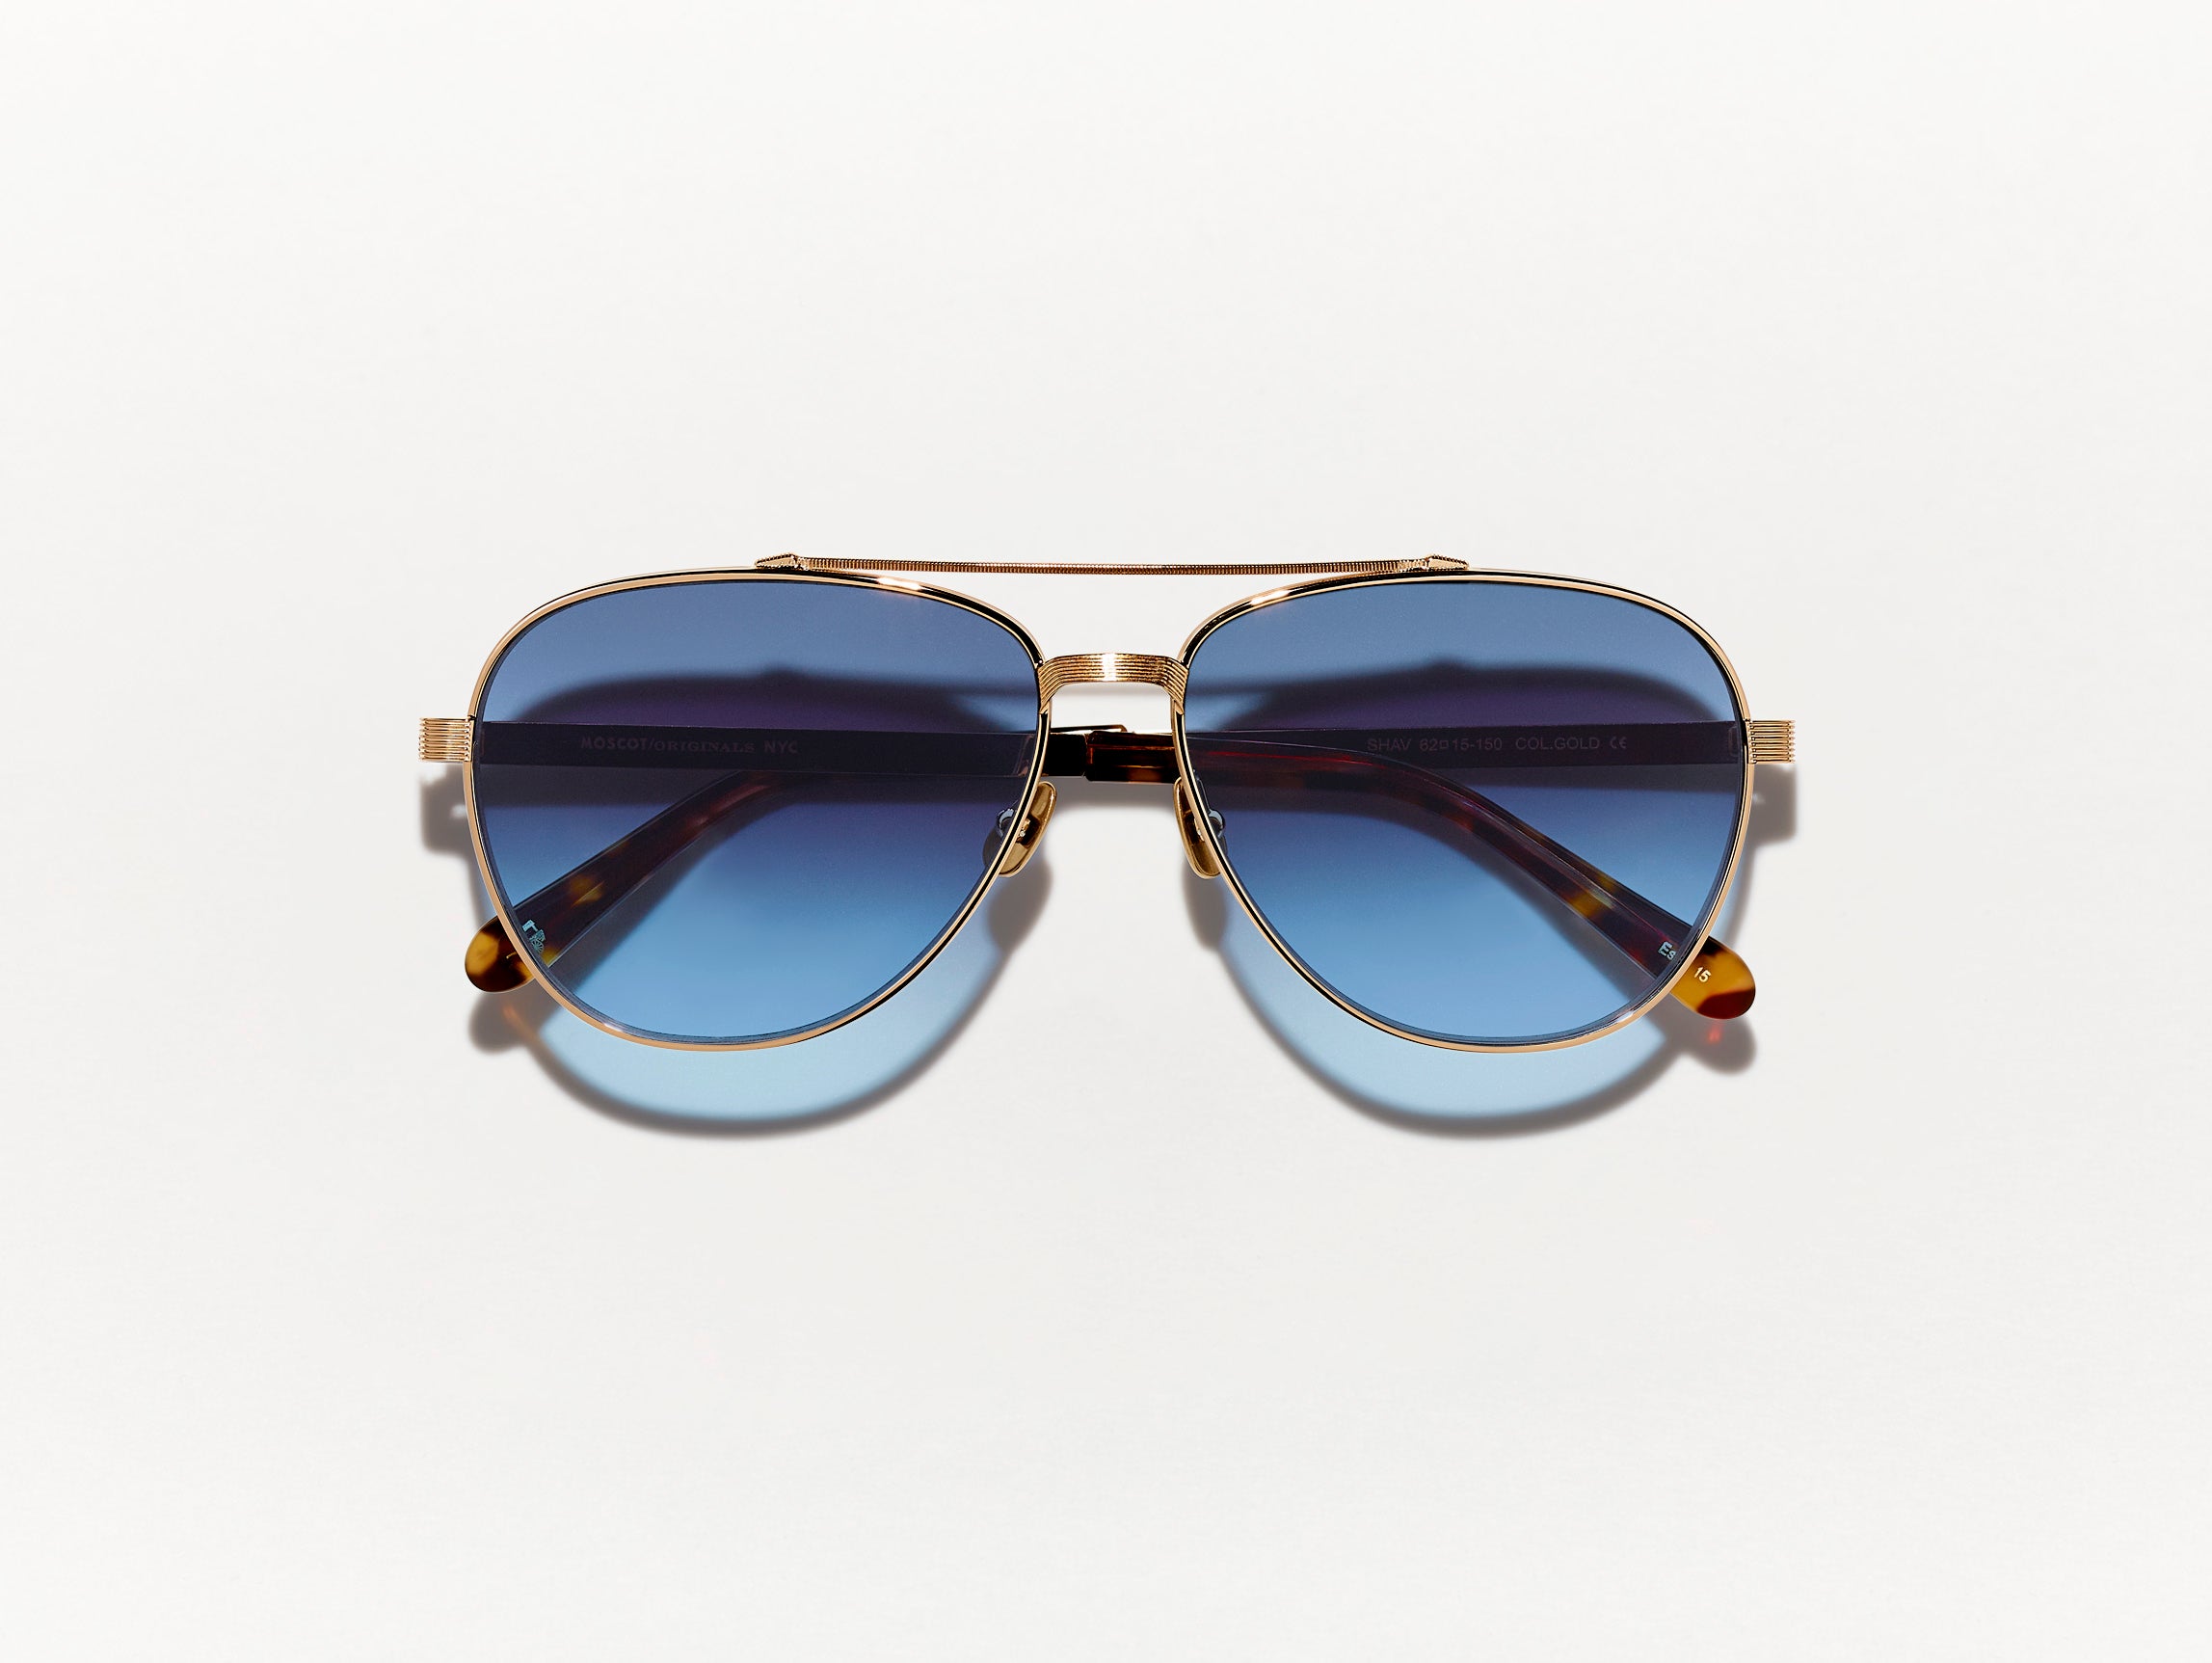 The SHAV SUN in Gold with Denim Blue Tinted Lenses